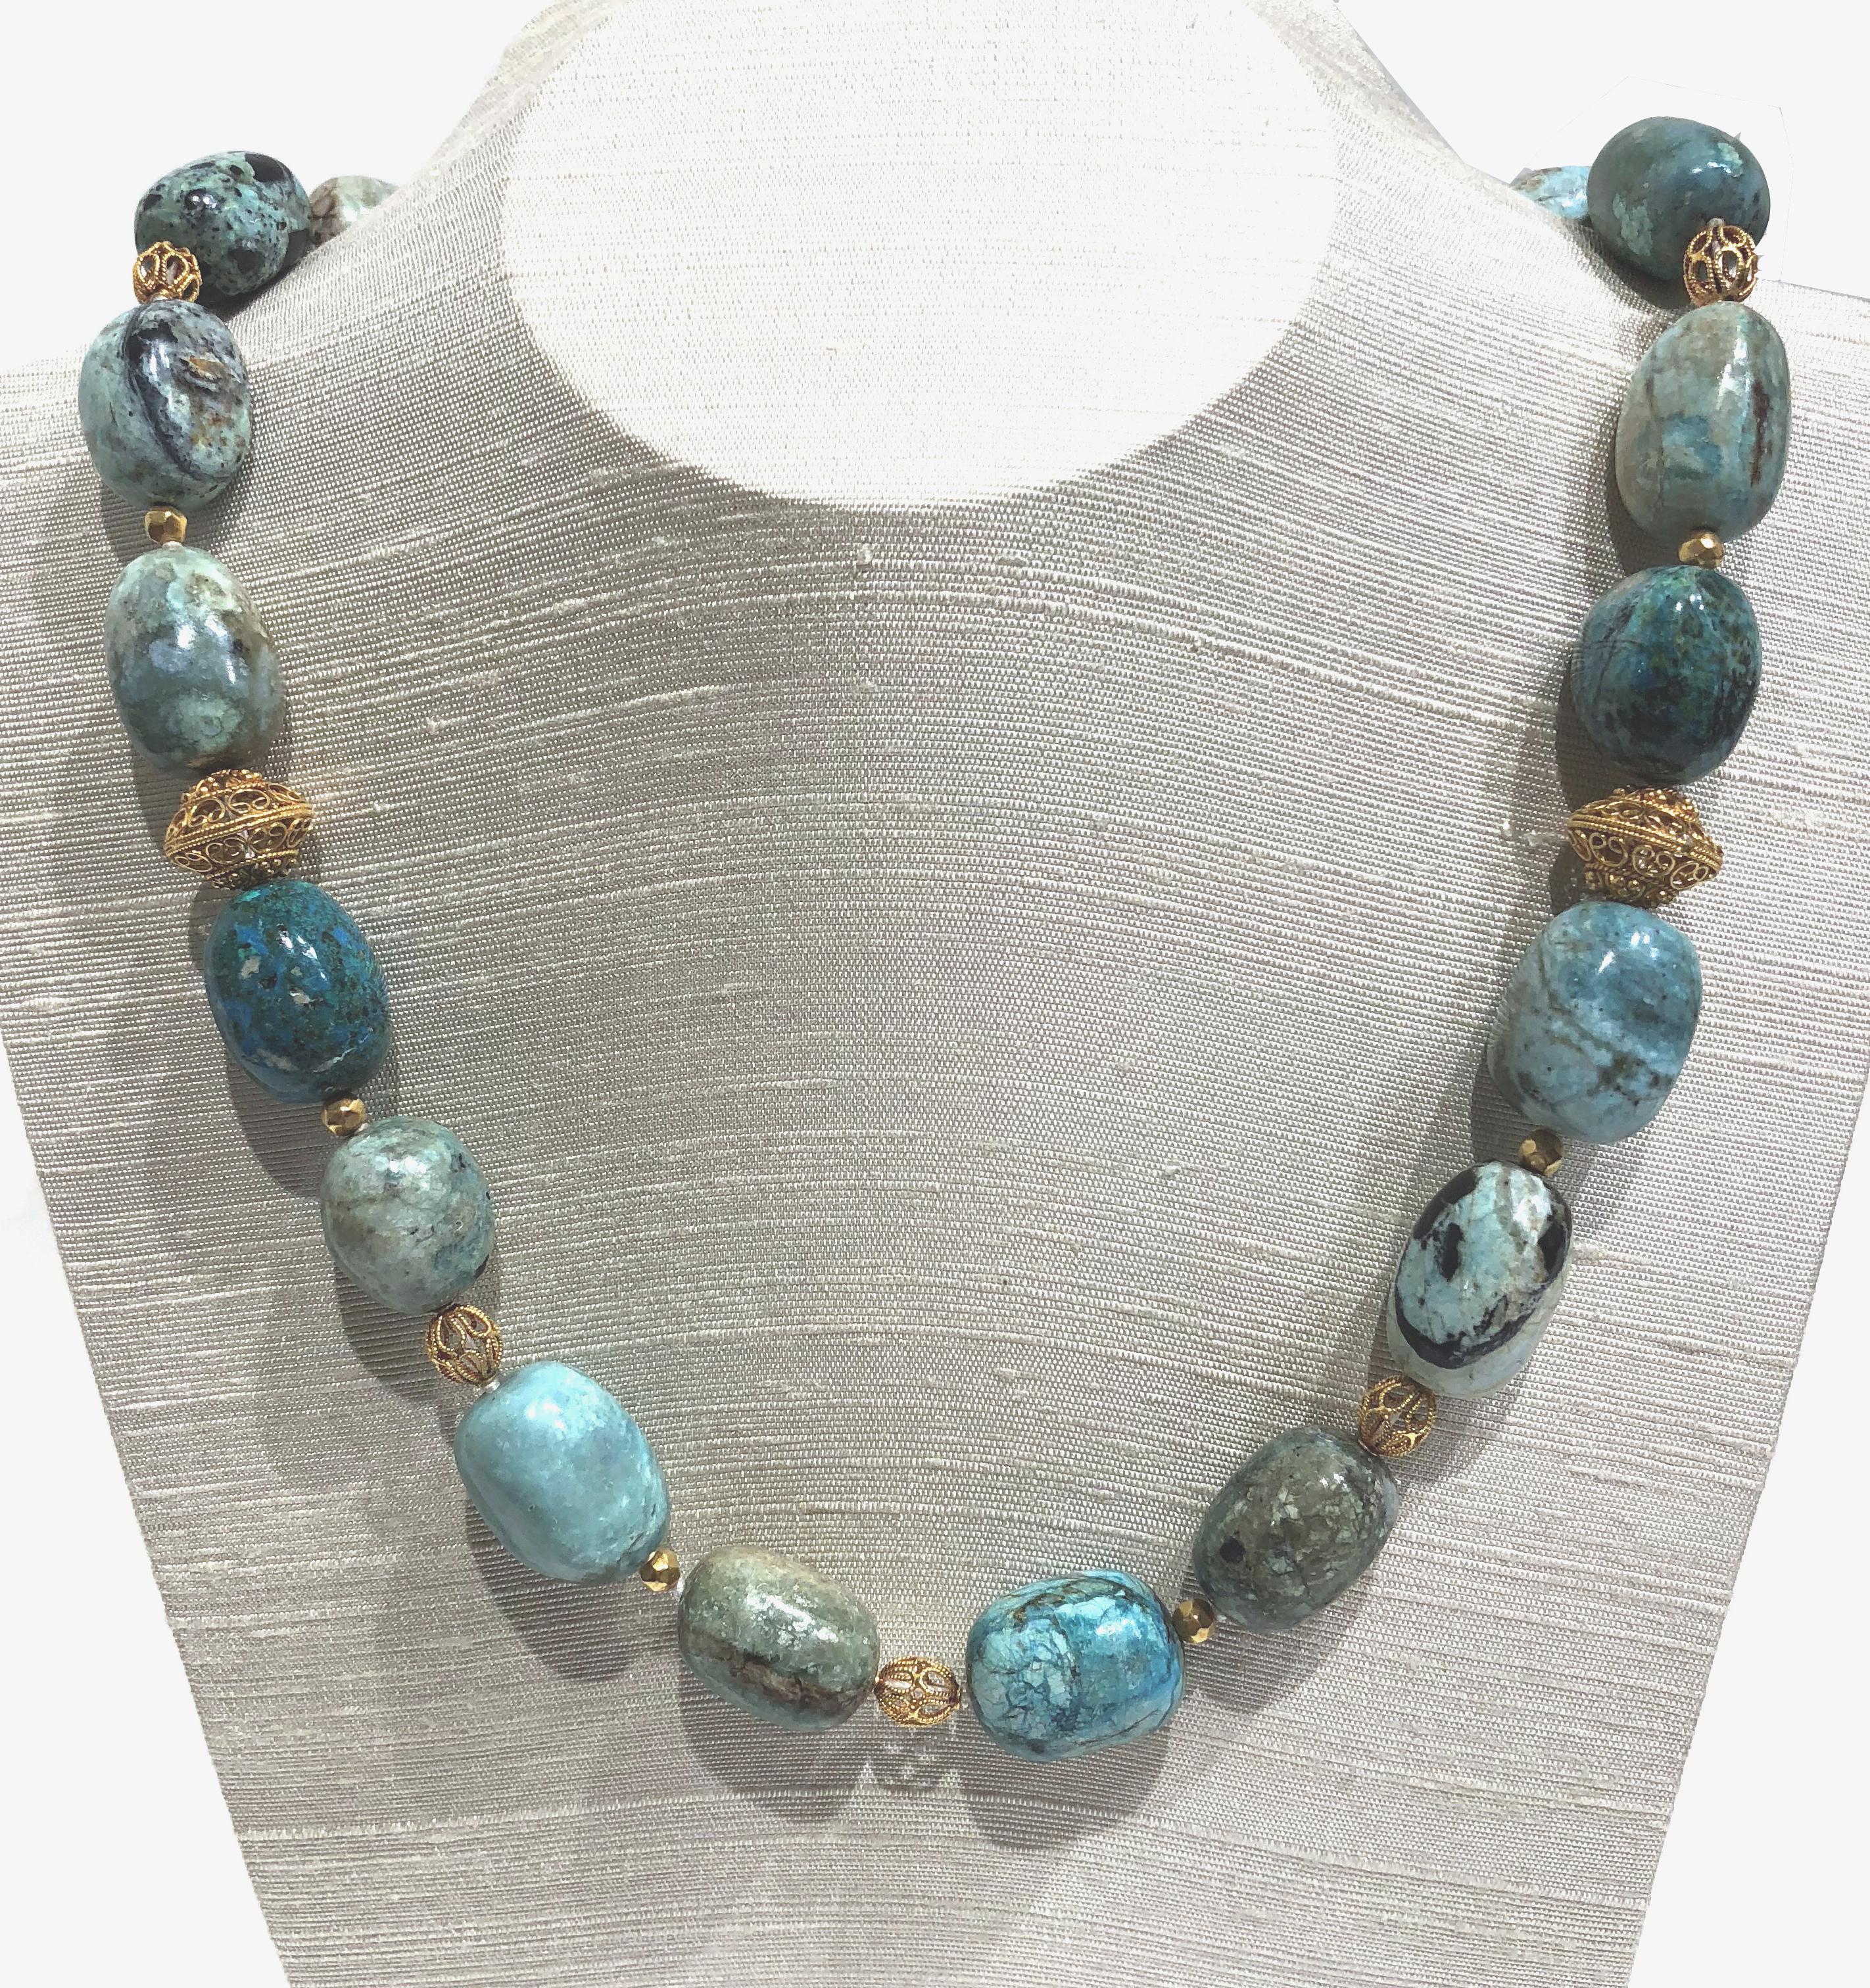 21 in (53.4cm) necklace with African blue opal beads and 18K gold beads & clasp.

The beautiful necklace with organic African Blue Opal beads is enhanced by ribbed 18K gold beads and gold clasp. 
